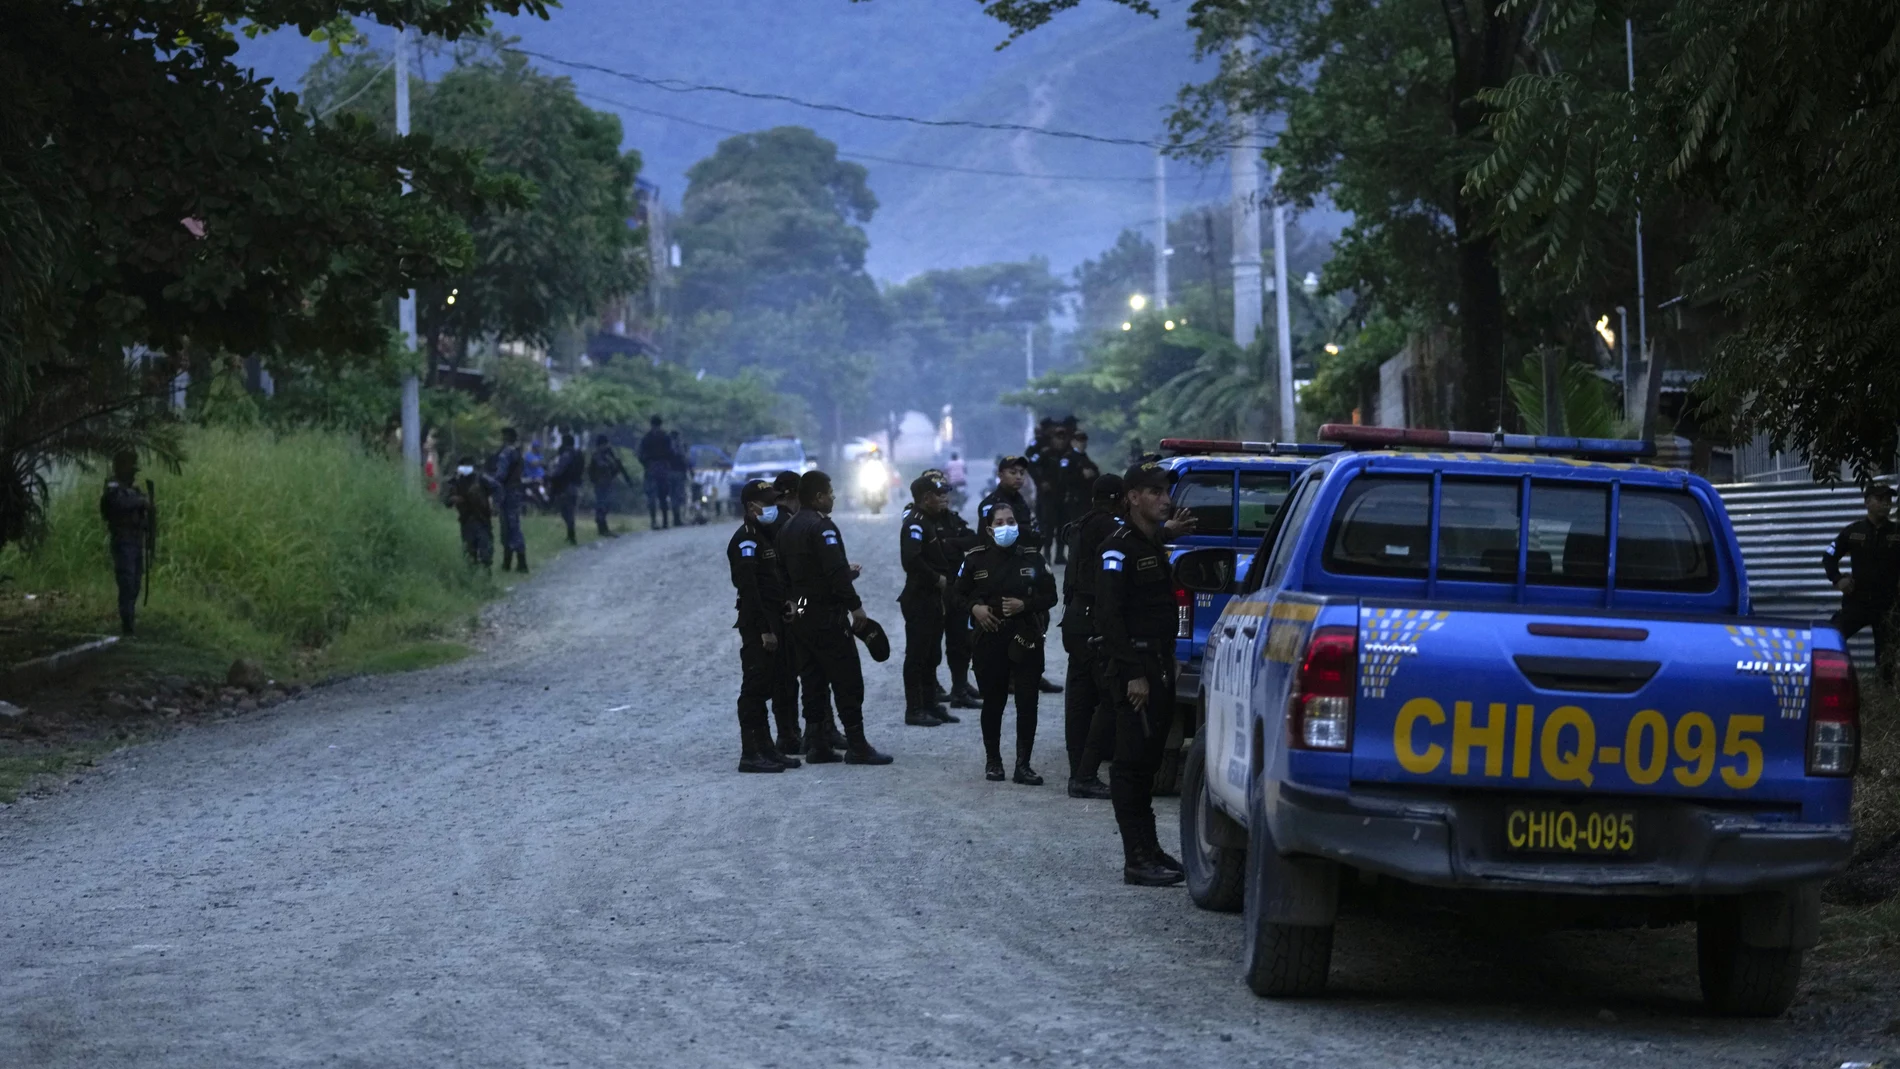 Police agents stand around a perimeter during raids in El Estor, at the northern coastal province of Izabal, Guatemala, Sunday, Oct. 24, 2021. The Guatemalan government has declared a month-long, dawn-to-dusk curfew and banned pubic gatherings following two days of protests against a mining project. (AP Photo/Moises Castillo)